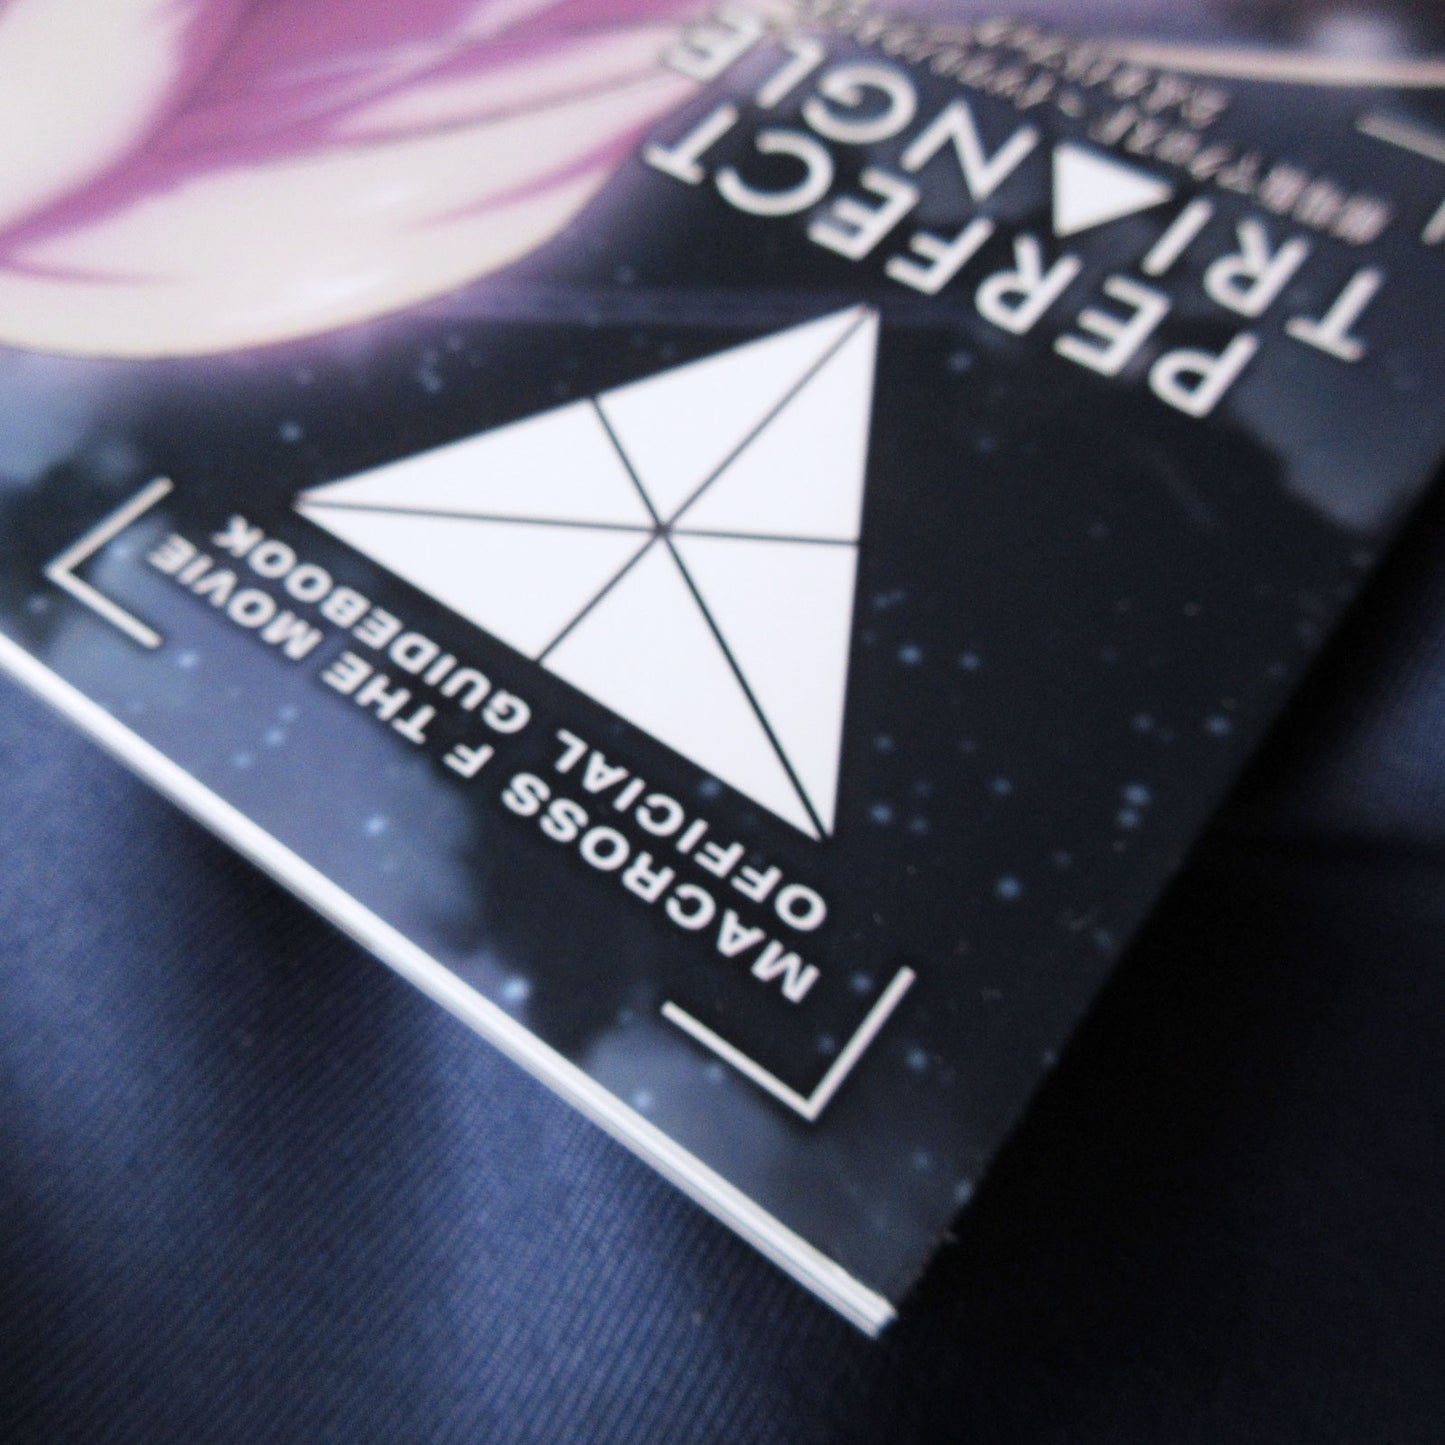 Macross Frontier The False Songstress Official Guide Book "Perfect Triangle"